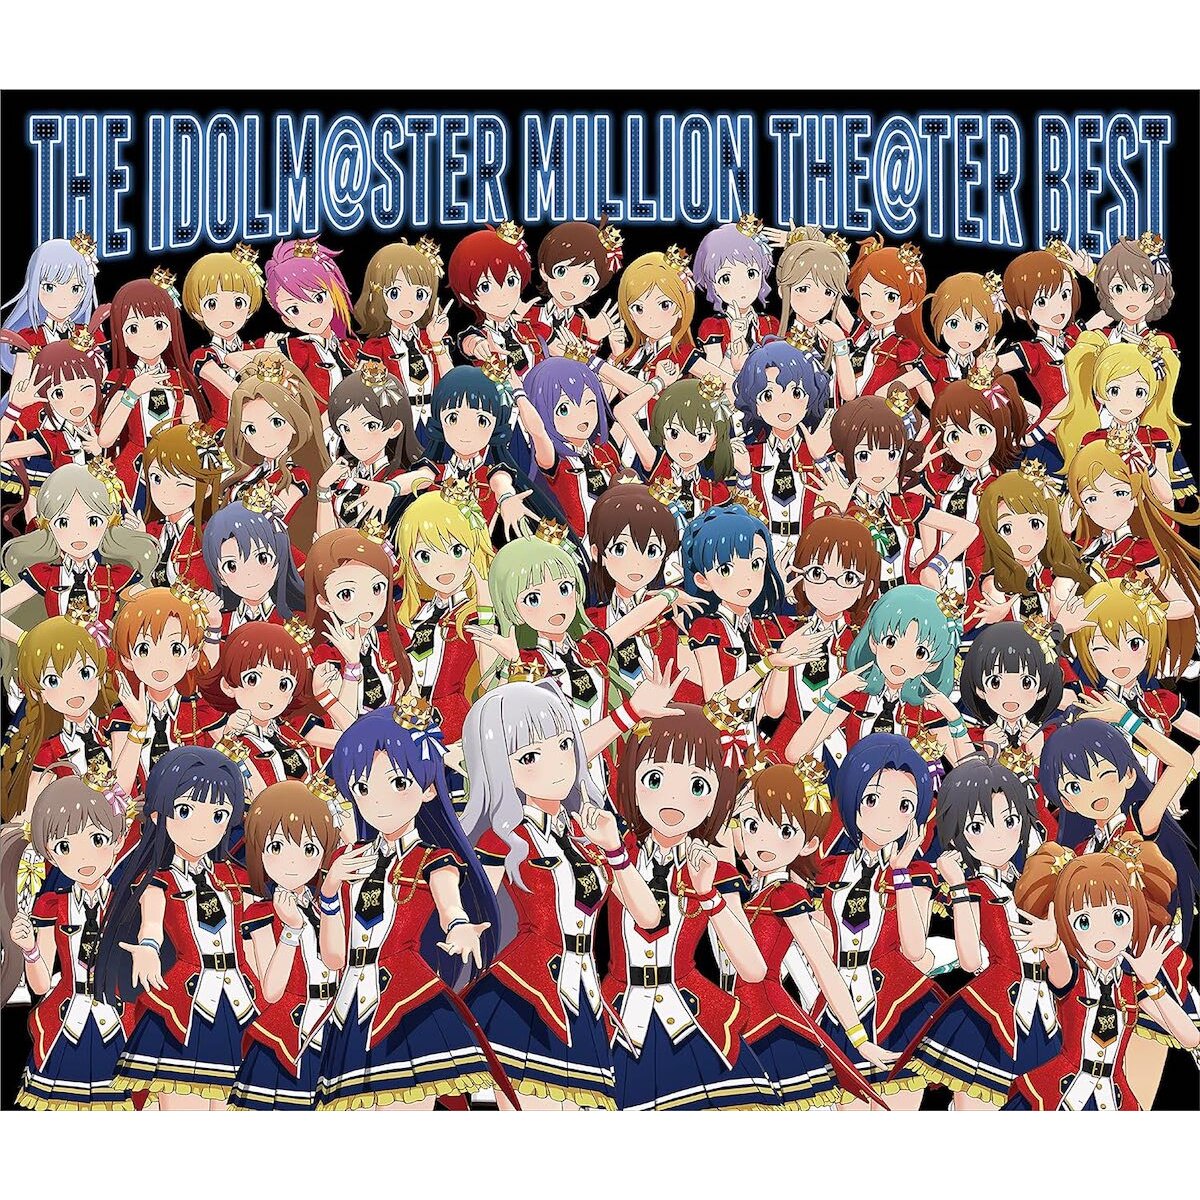 THE IDOLM@STER LIVE THE@TER SELECTION CD - www.stedile.com.br